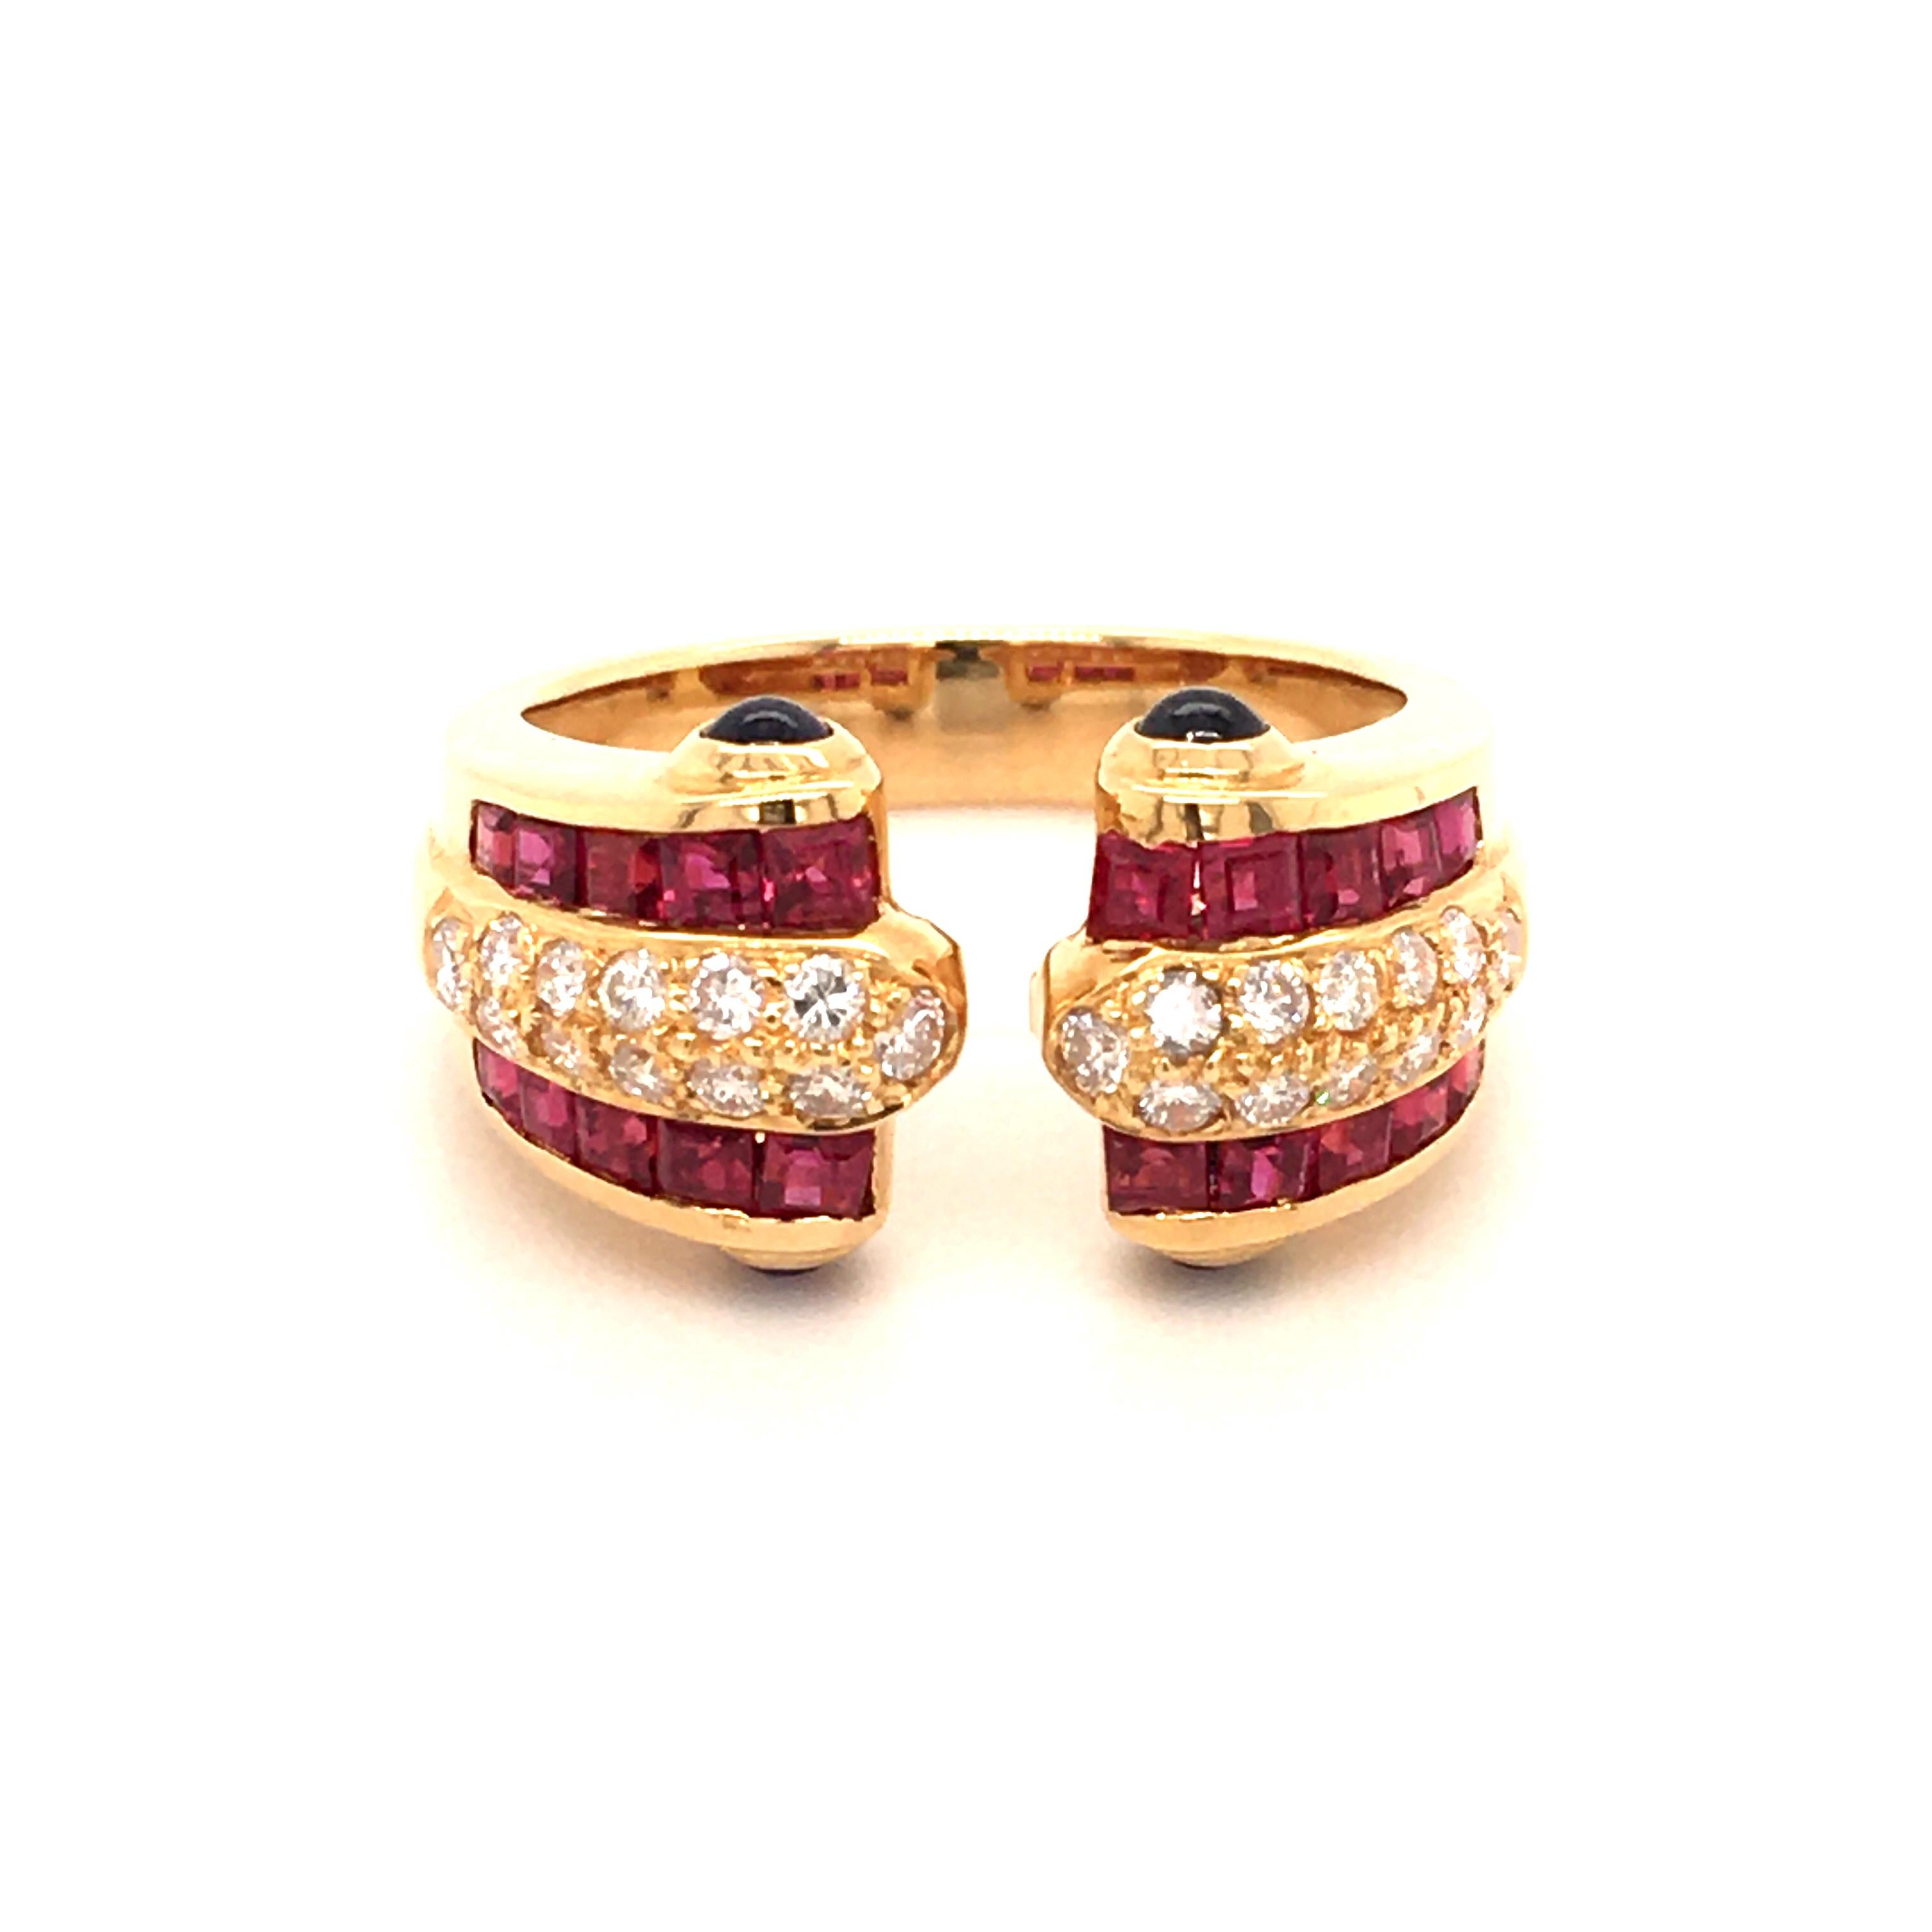 Elegant ring in 18 karat yellow gold set with 20 square cut rubies with an approximate total weight of 1.20 carats. Accented with 24 brilliant cut diamonds of G/H color and si clarity, total weight approximately 0.43 carats, and four sapphire